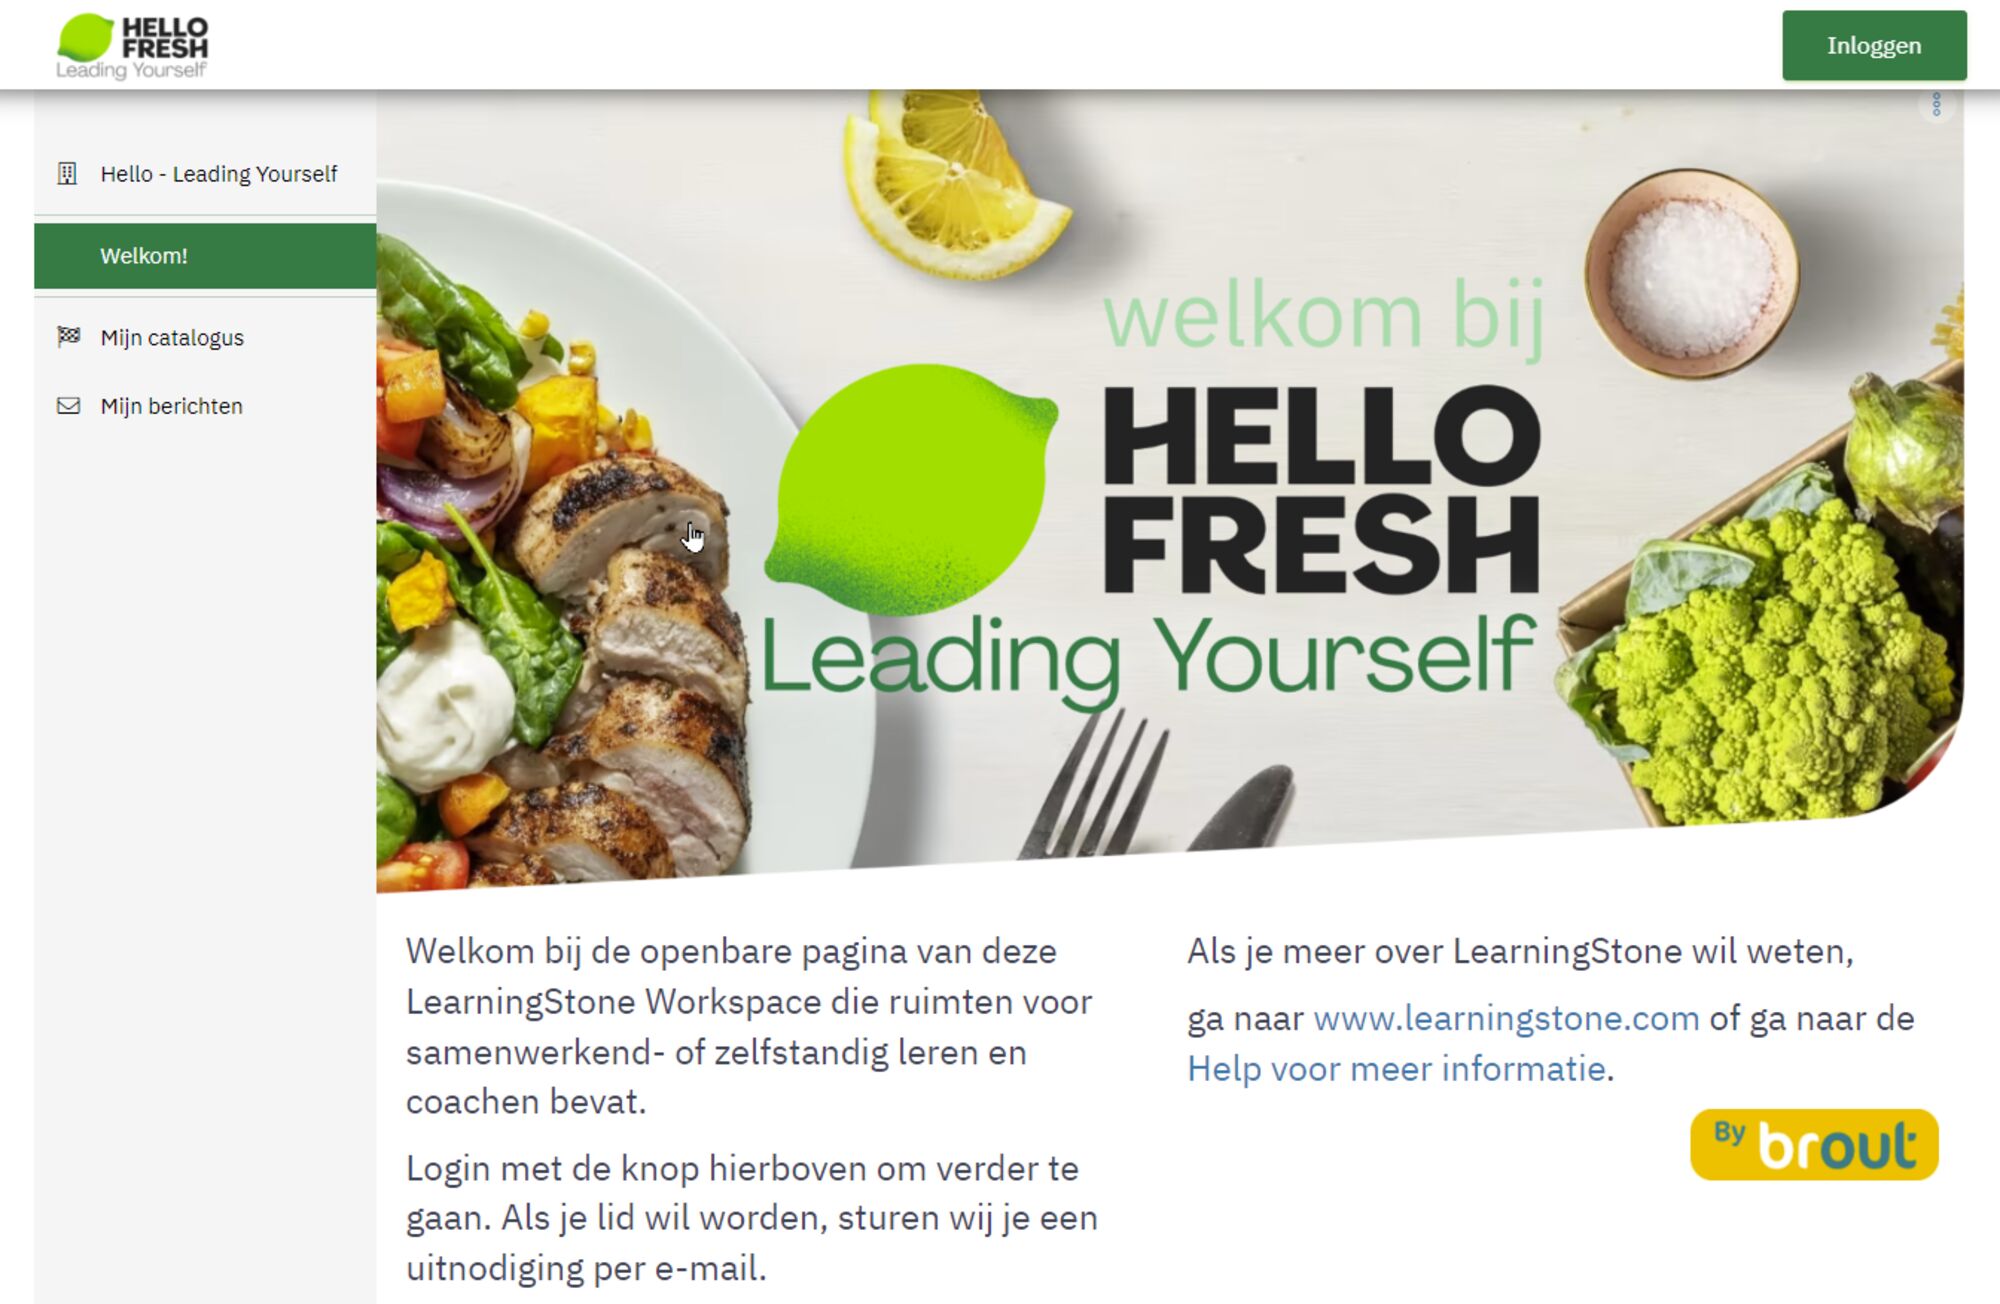 hellofresh by brout.png